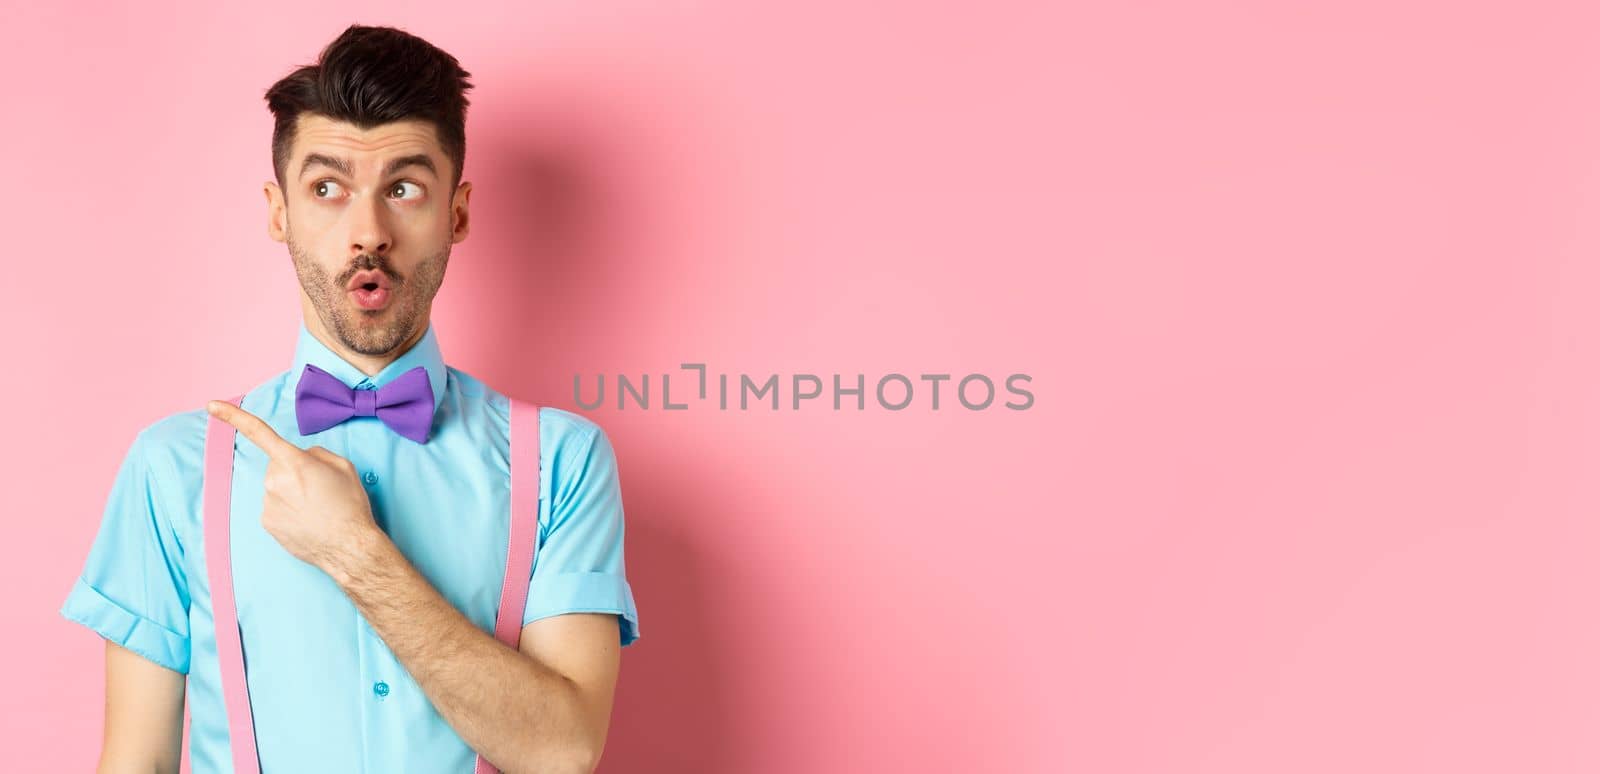 Intrigued young man pointing finger left at logo, checking out promo offer, standing in bow-tie and classy outfit, pink background.